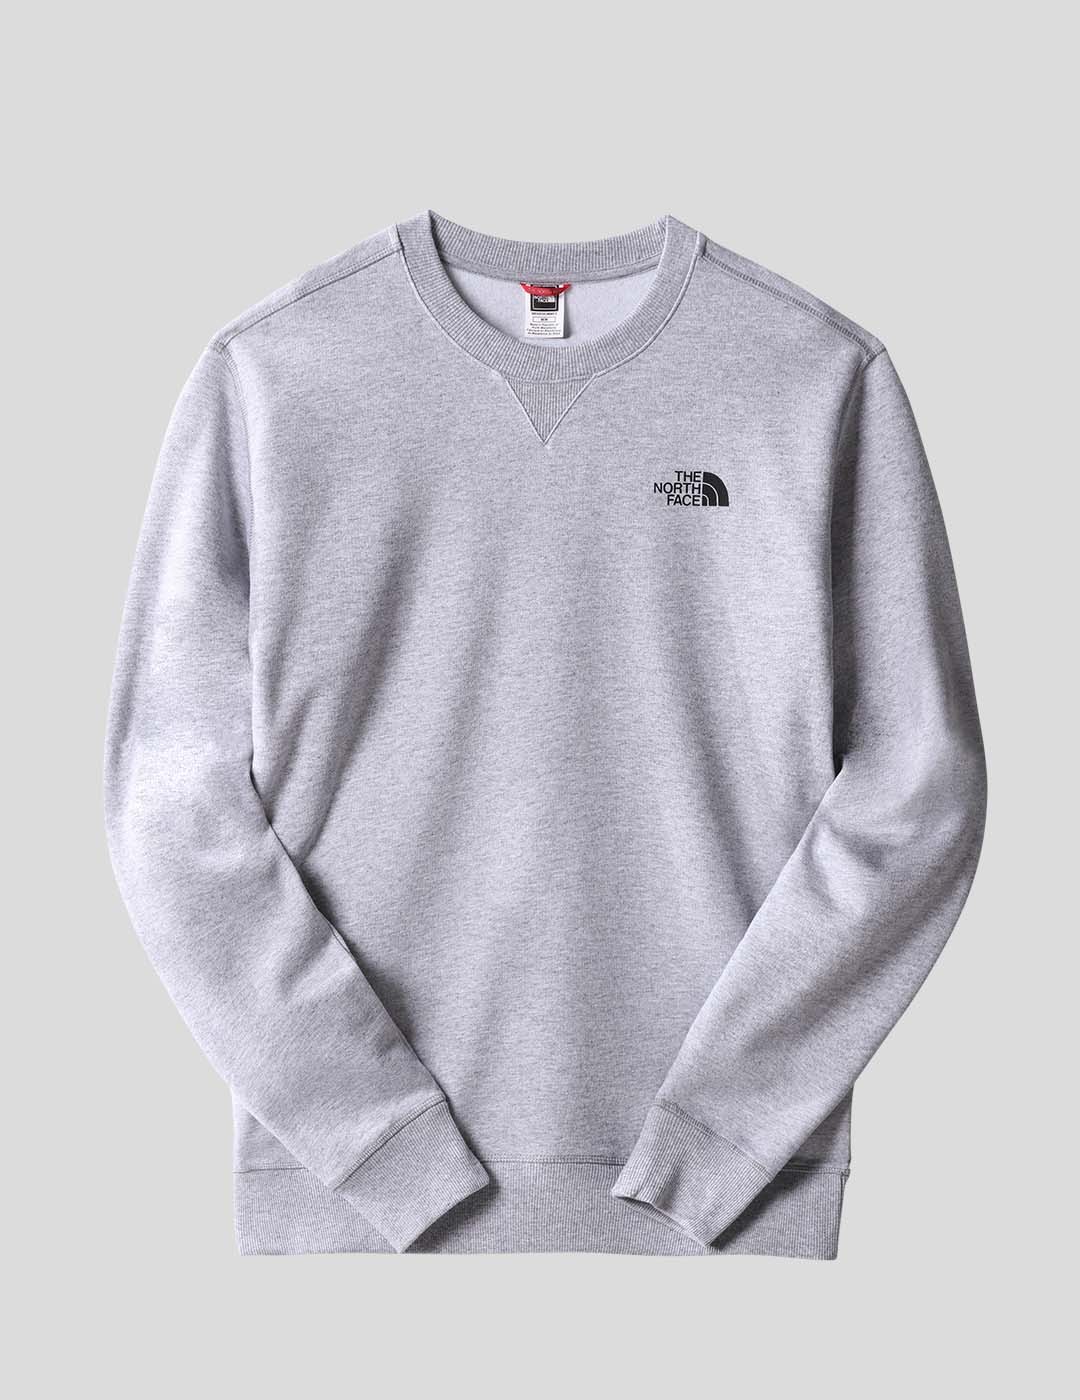 SUDADERA THE NORTH FACE SIMPLE DOME CREW  TNF LIGHT GREY HEATHER